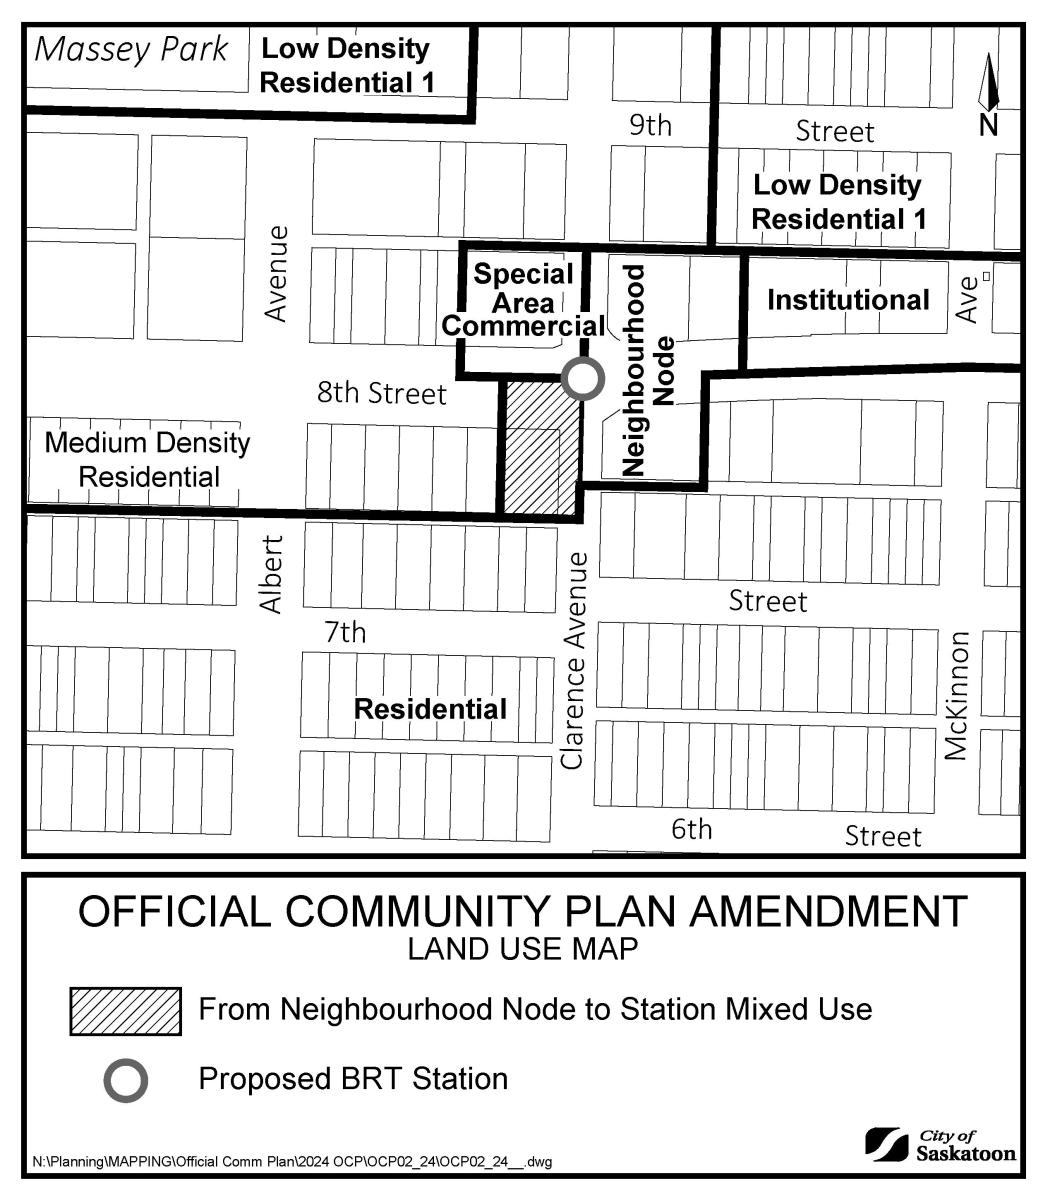 Map showing affected site on 8th Street and proposed BRT station at 8th Street and Clarence Avenue